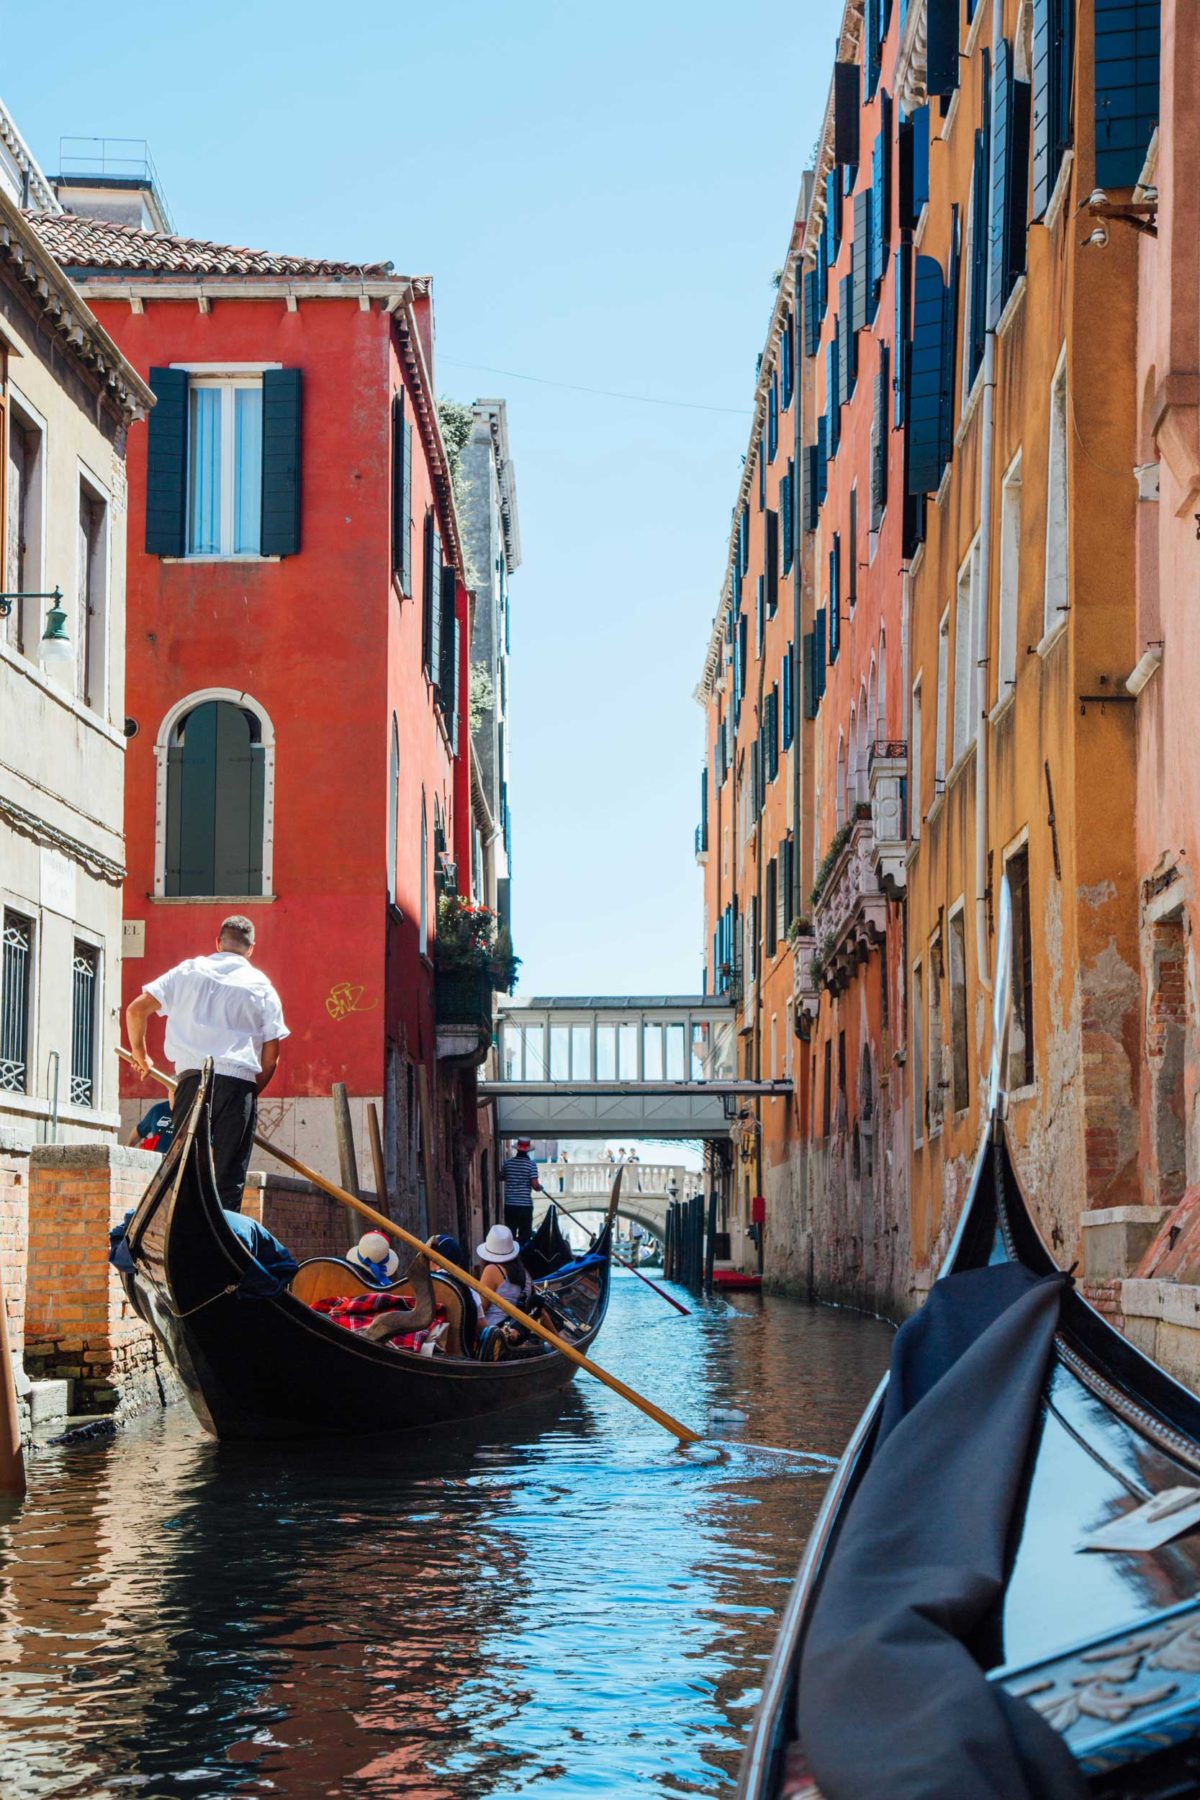 A gondola with passenger rowing through a narrow canal between colourful buildings, Venice, Italy